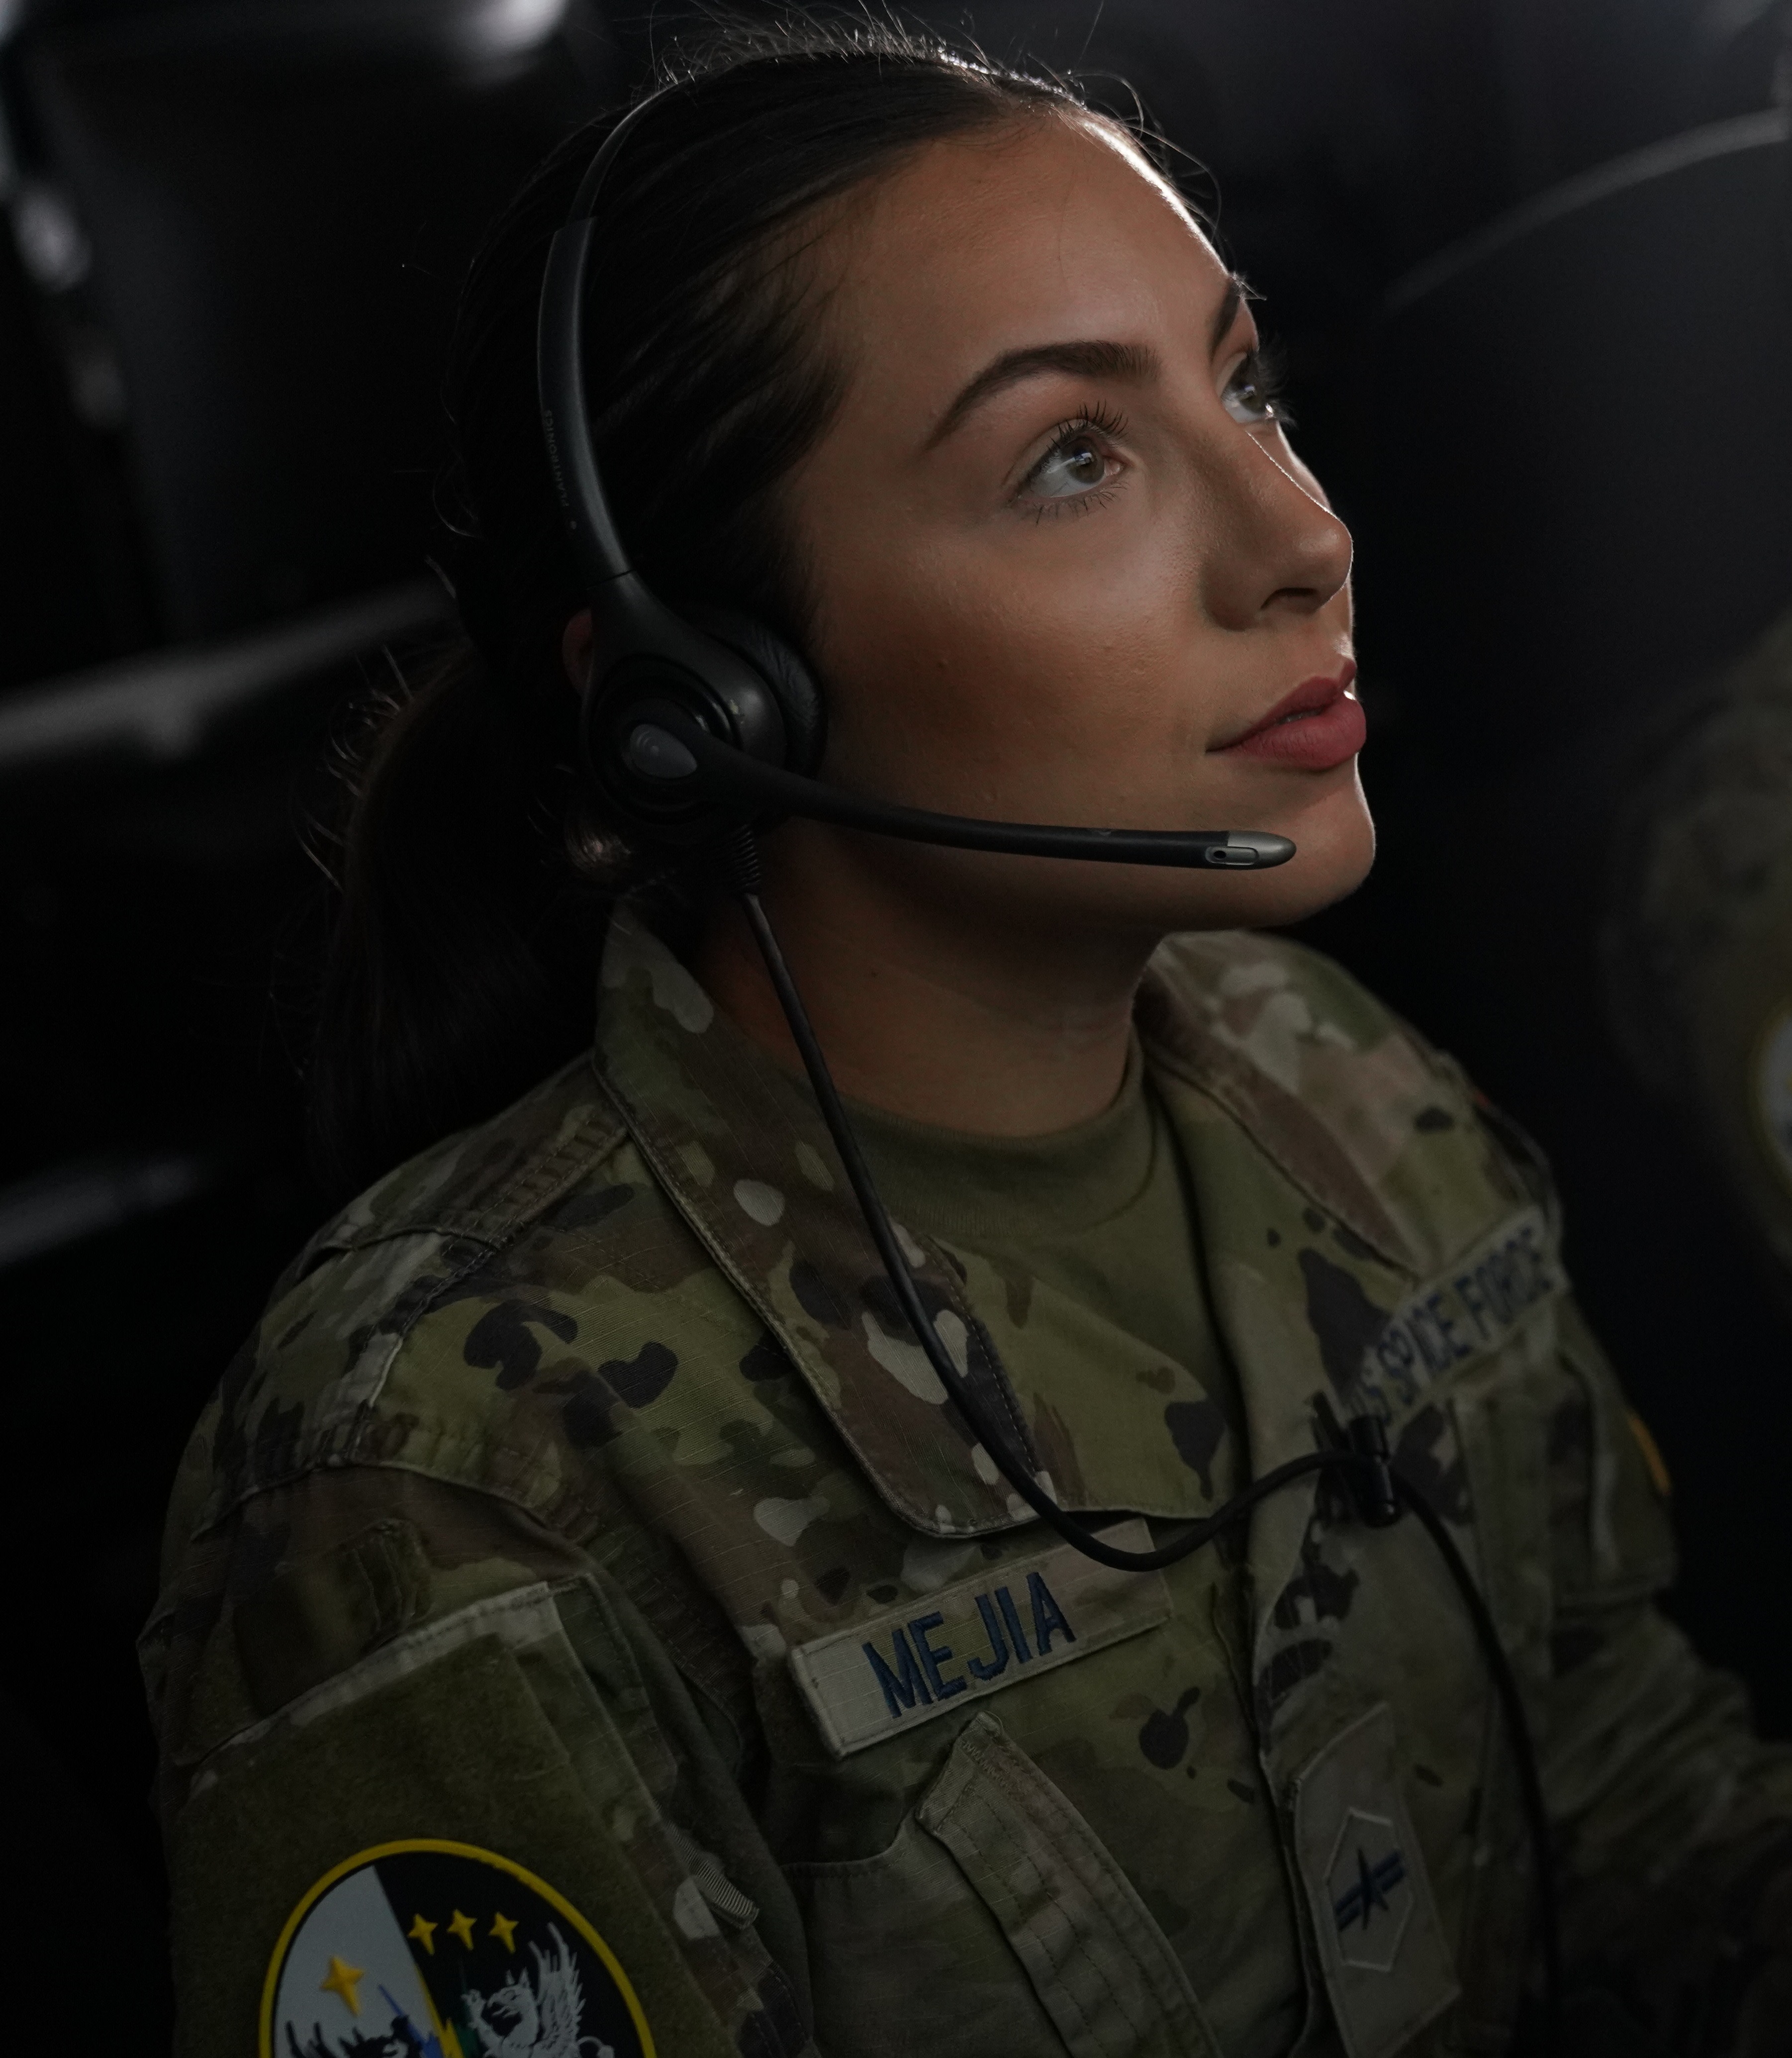 Guardian wearing a headset at work